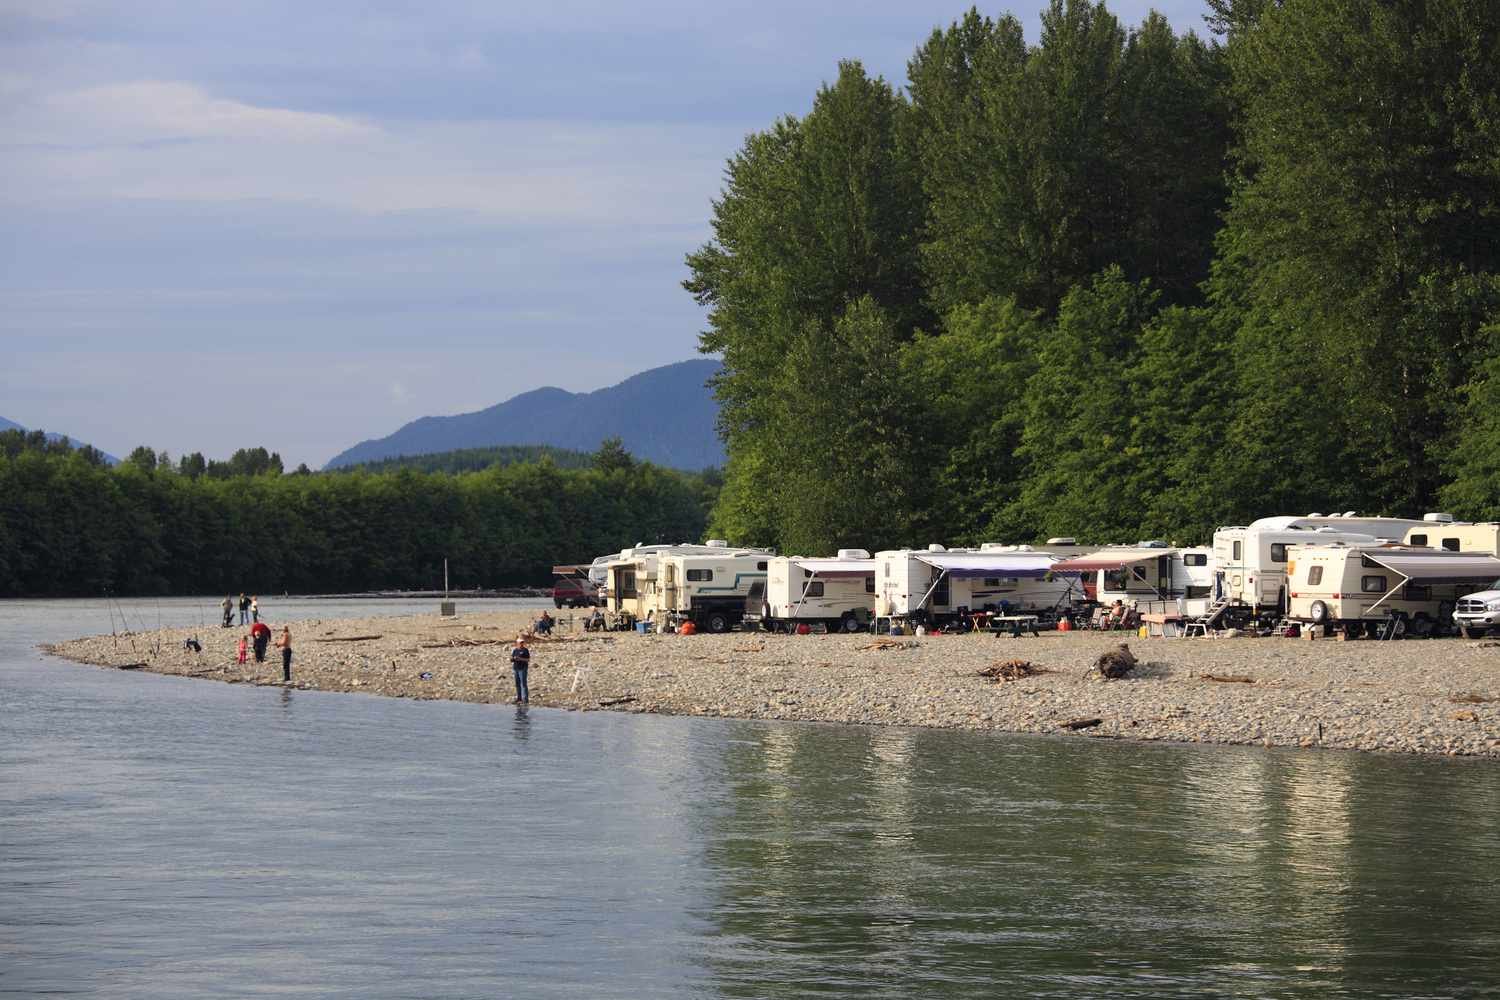 The Best Types of Places to Park Your RV